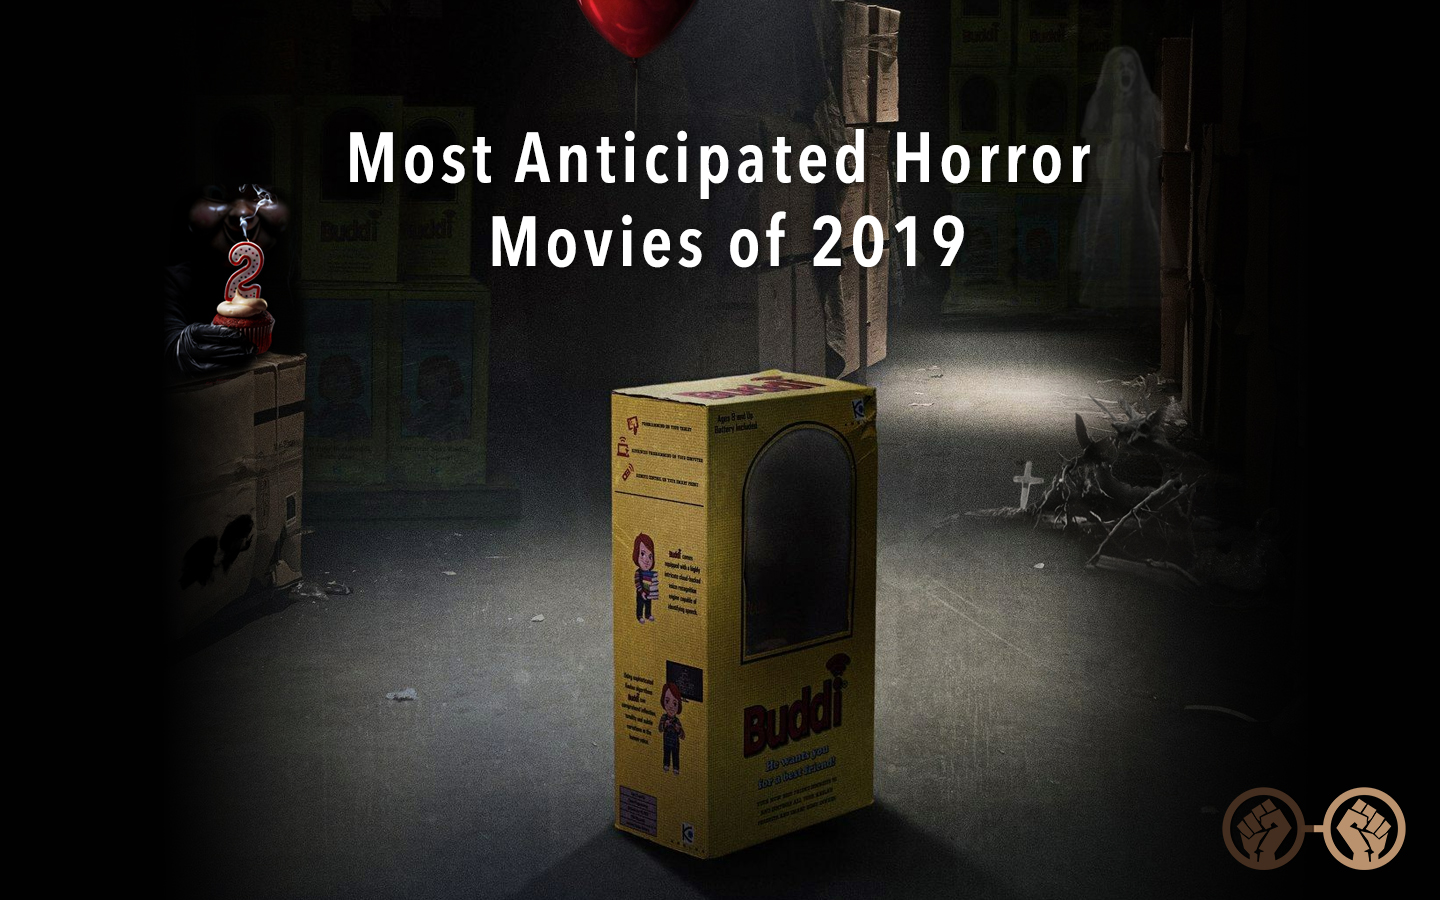 Most Anticipated Horror Movies of 2019